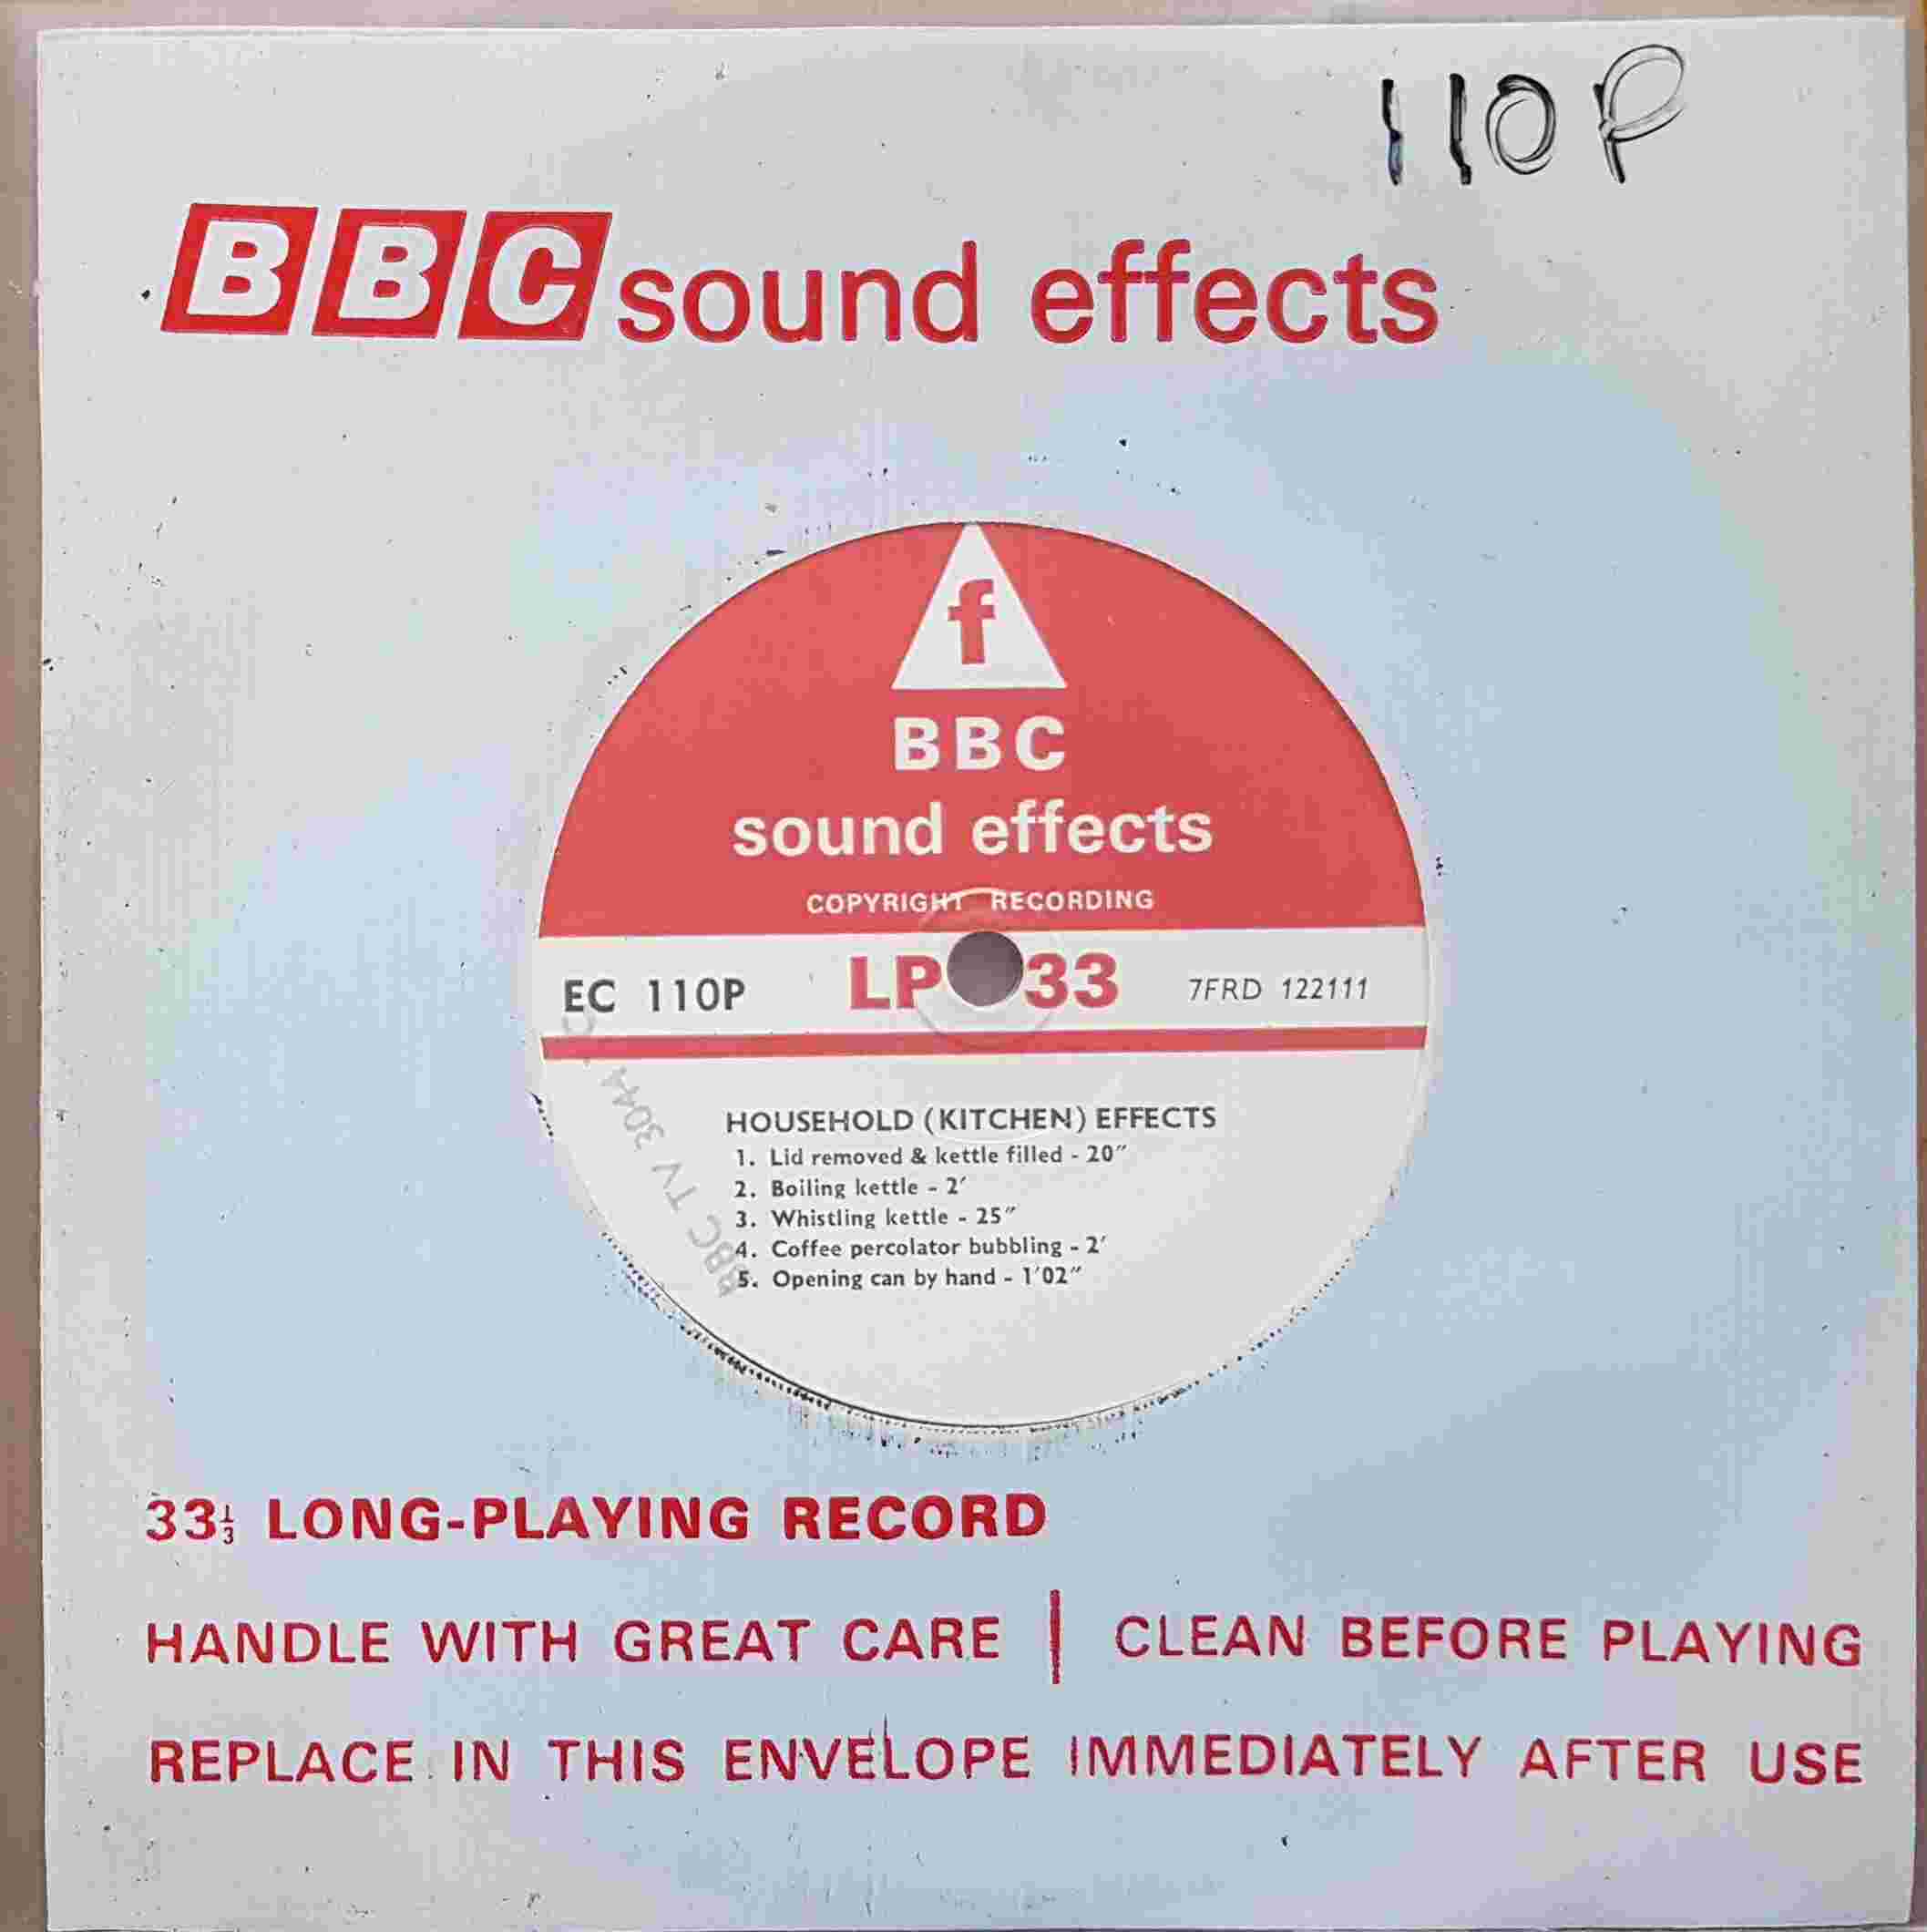 Picture of EC 110P Household (Kitchen) effects by artist Not registered from the BBC singles - Records and Tapes library